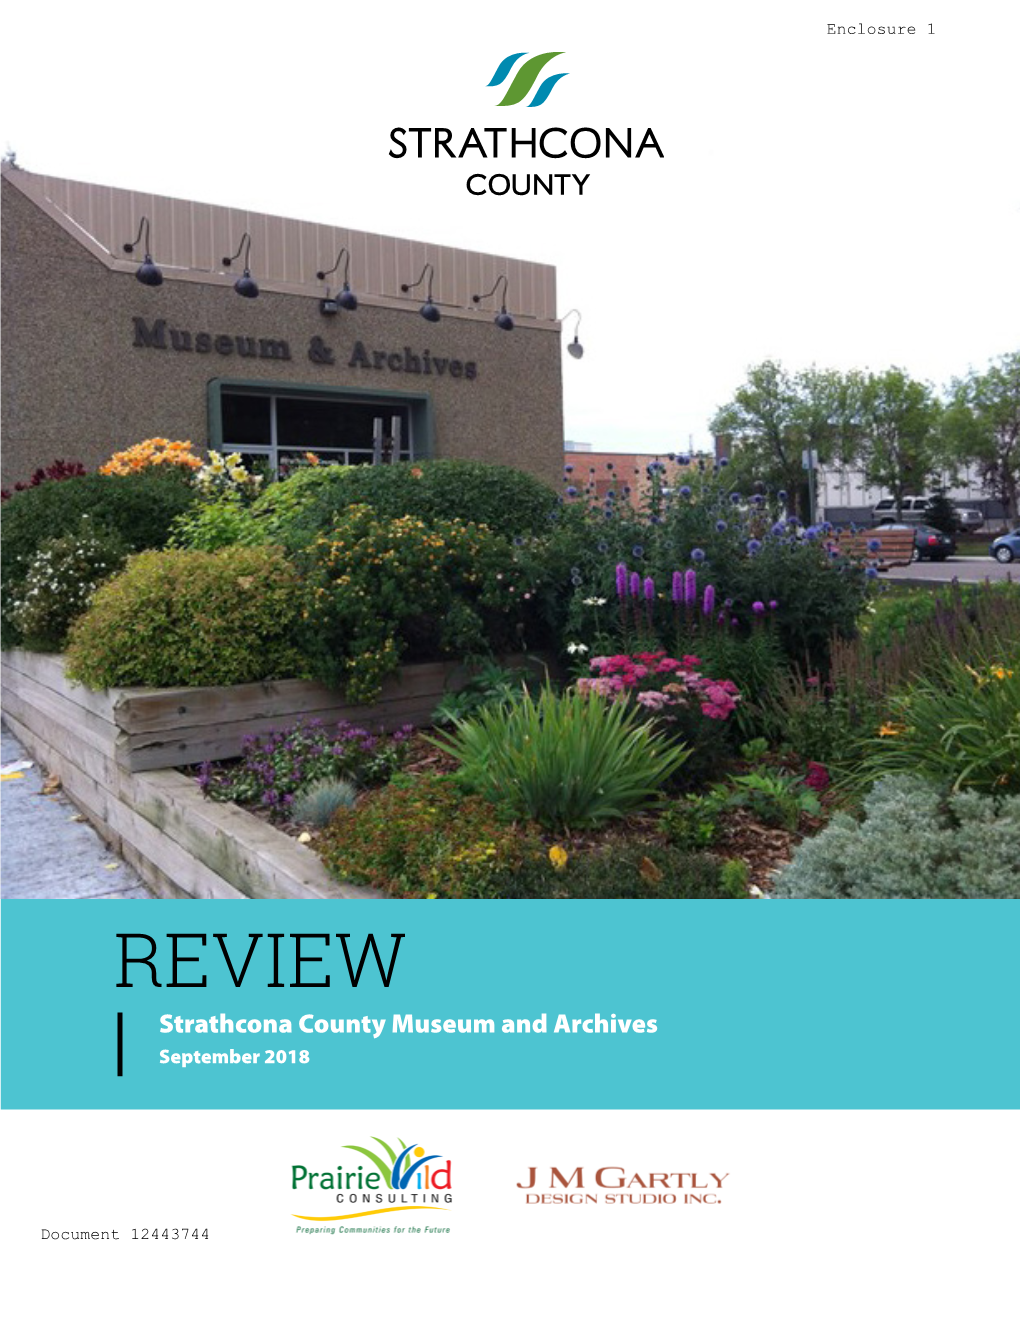 REVIEW Strathcona County Museum and Archives September 2018 Blank Page Holder Text DO NOT DELETE MUSEUM REVIEW CONTENT